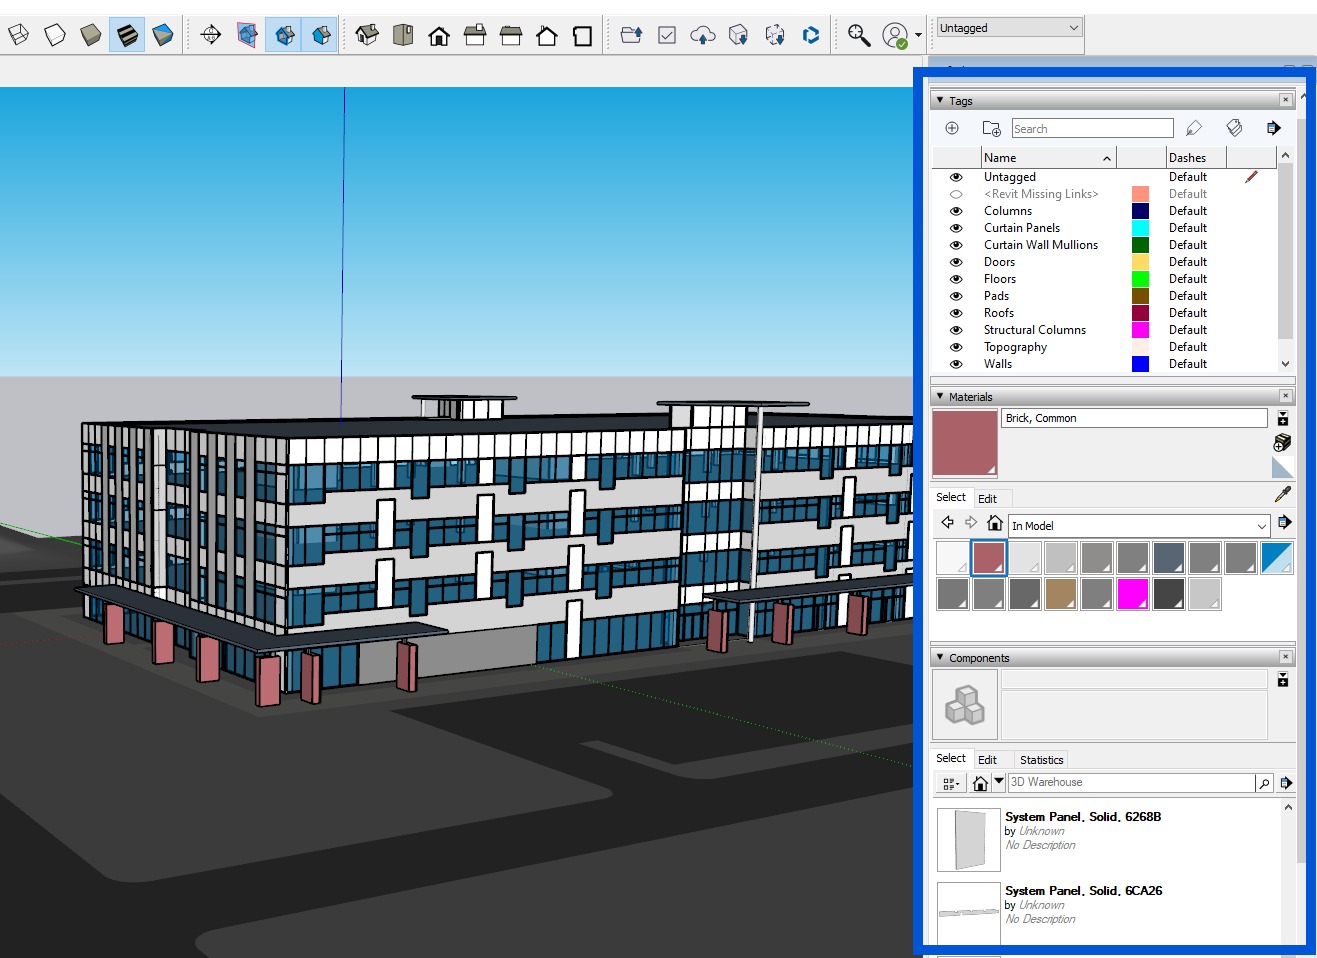 Well-organized SketchUp model